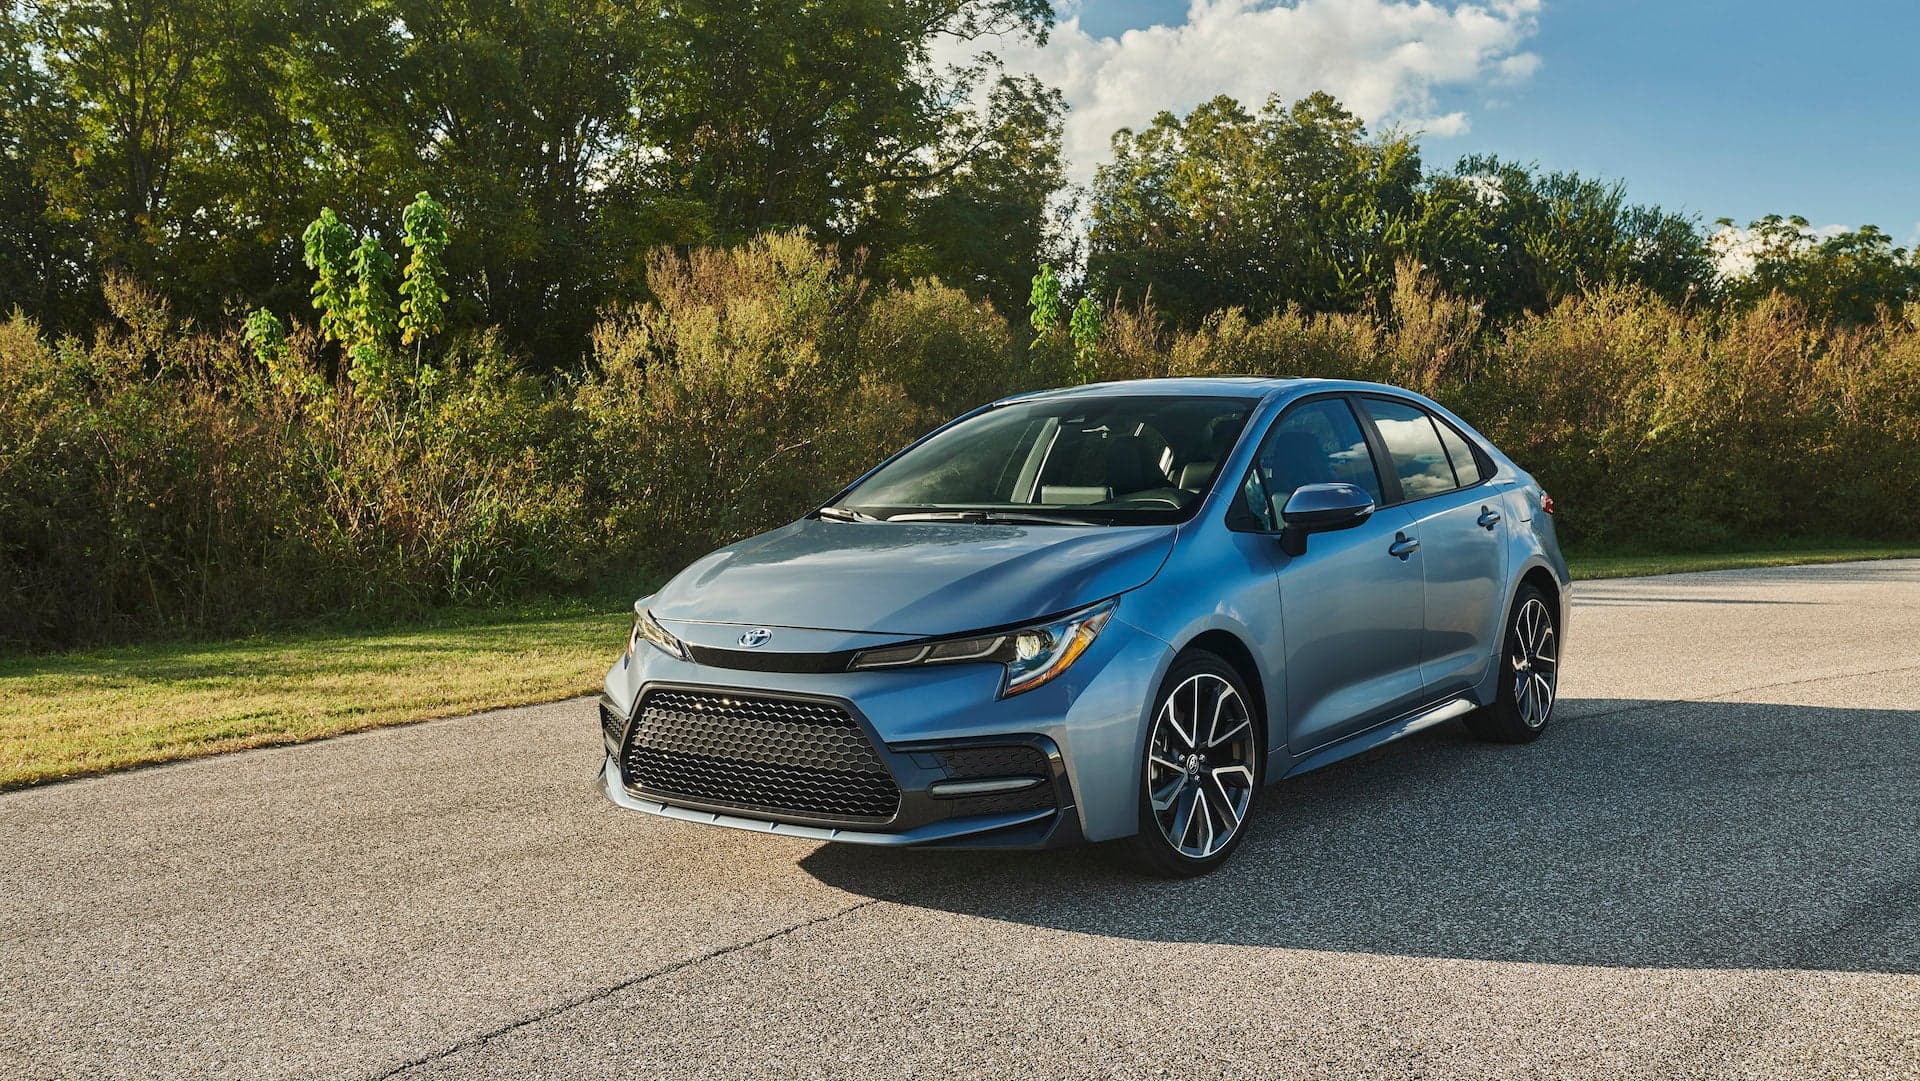 2020 Toyota Corolla: All-New Inside and Out Plus Standard Advanced Safety Tech